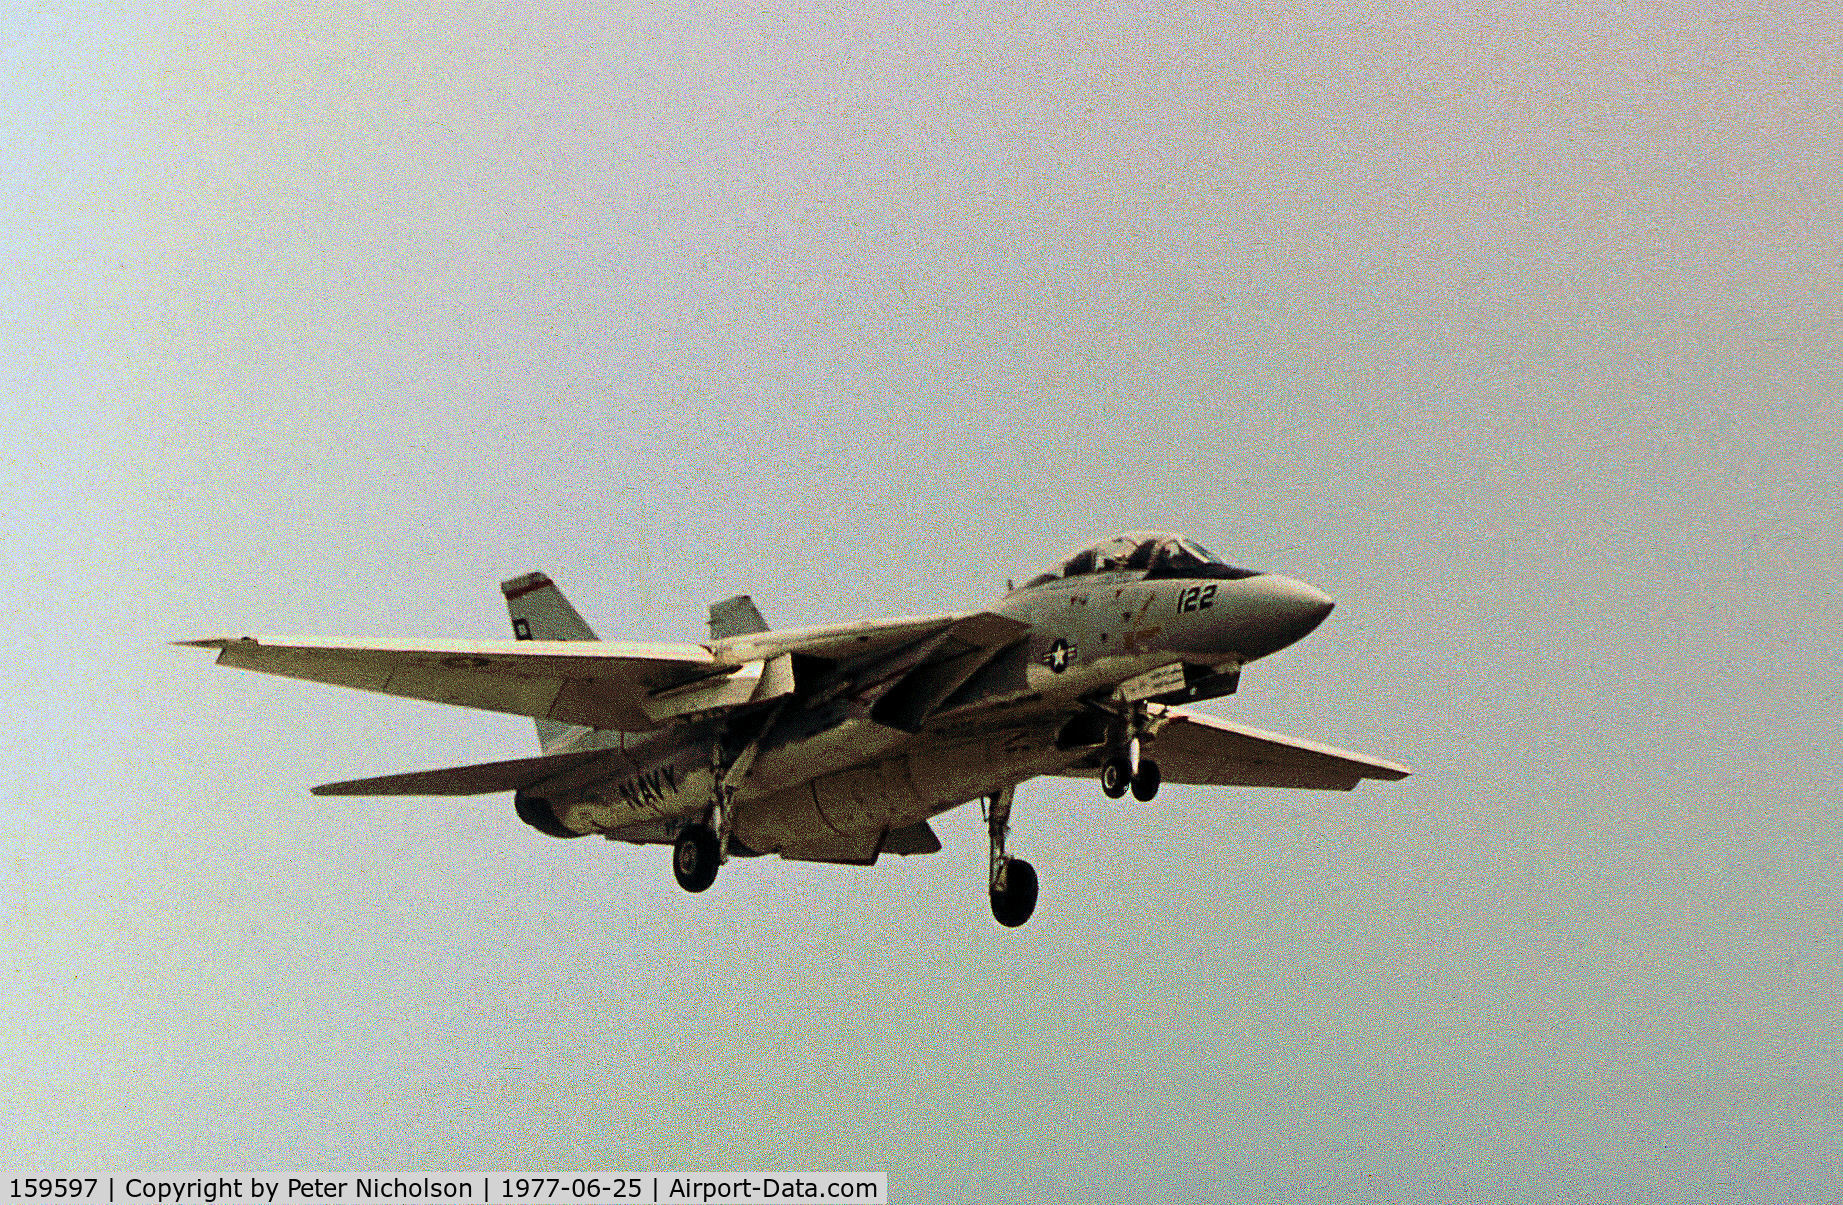 159597, Grumman F-14A Tomcat C/N 144, F-14A Tomcat of Fighter Squadron VF-14 on approach to RAF Greenham Common at the 1977 International Air Tattoo.